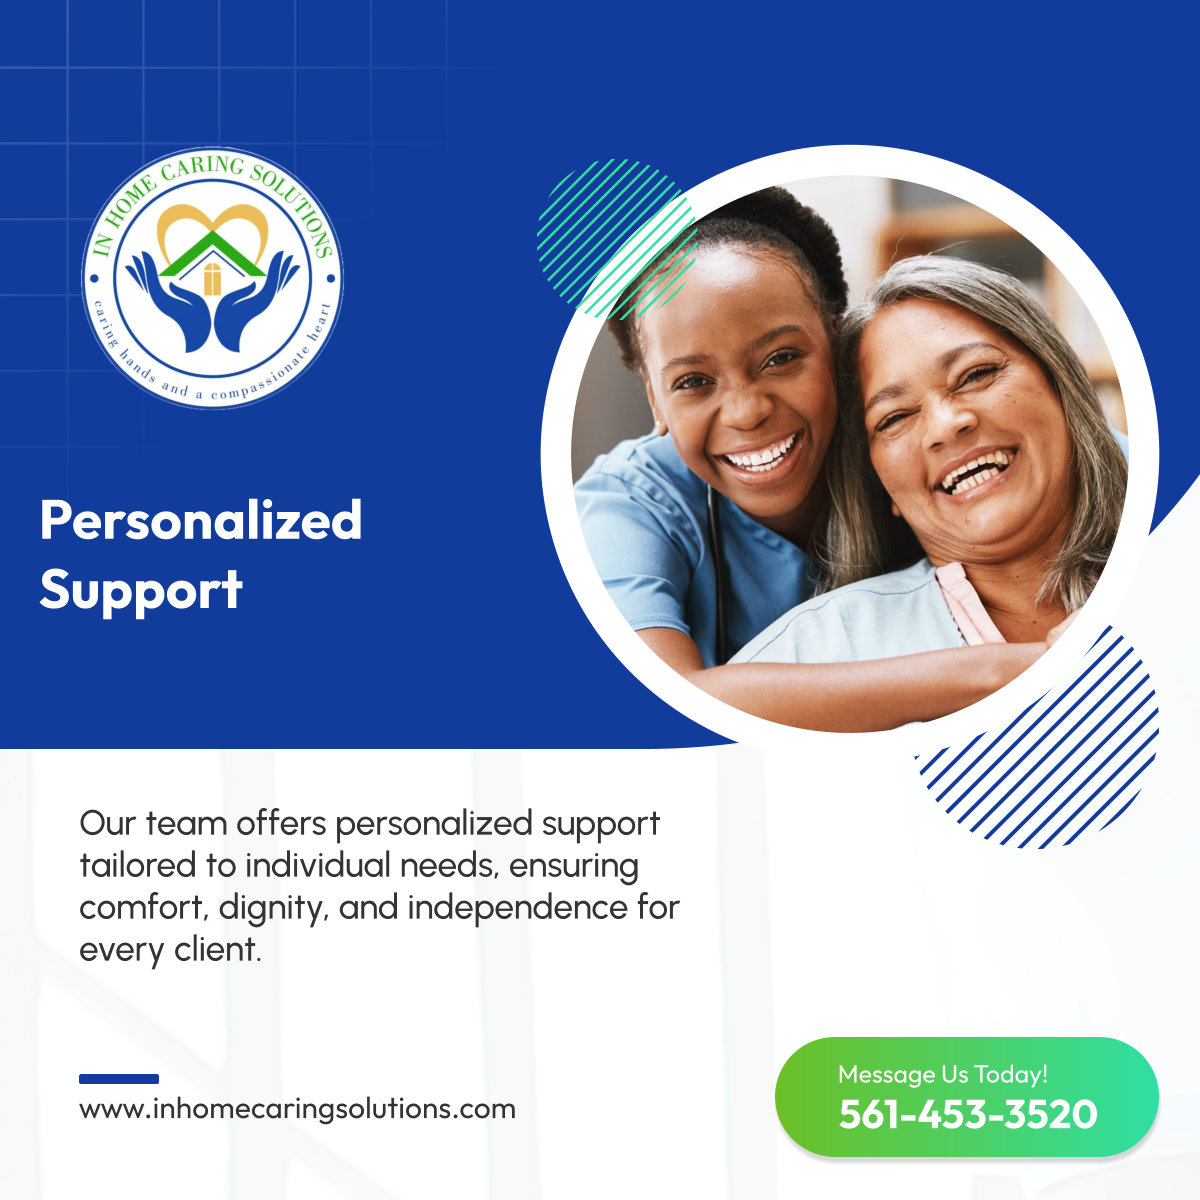 Discover personalized support tailored to your needs, ensuring comfort, dignity, and independence.

#BocaRatonFL #HomeCare #PersonalizedSupport